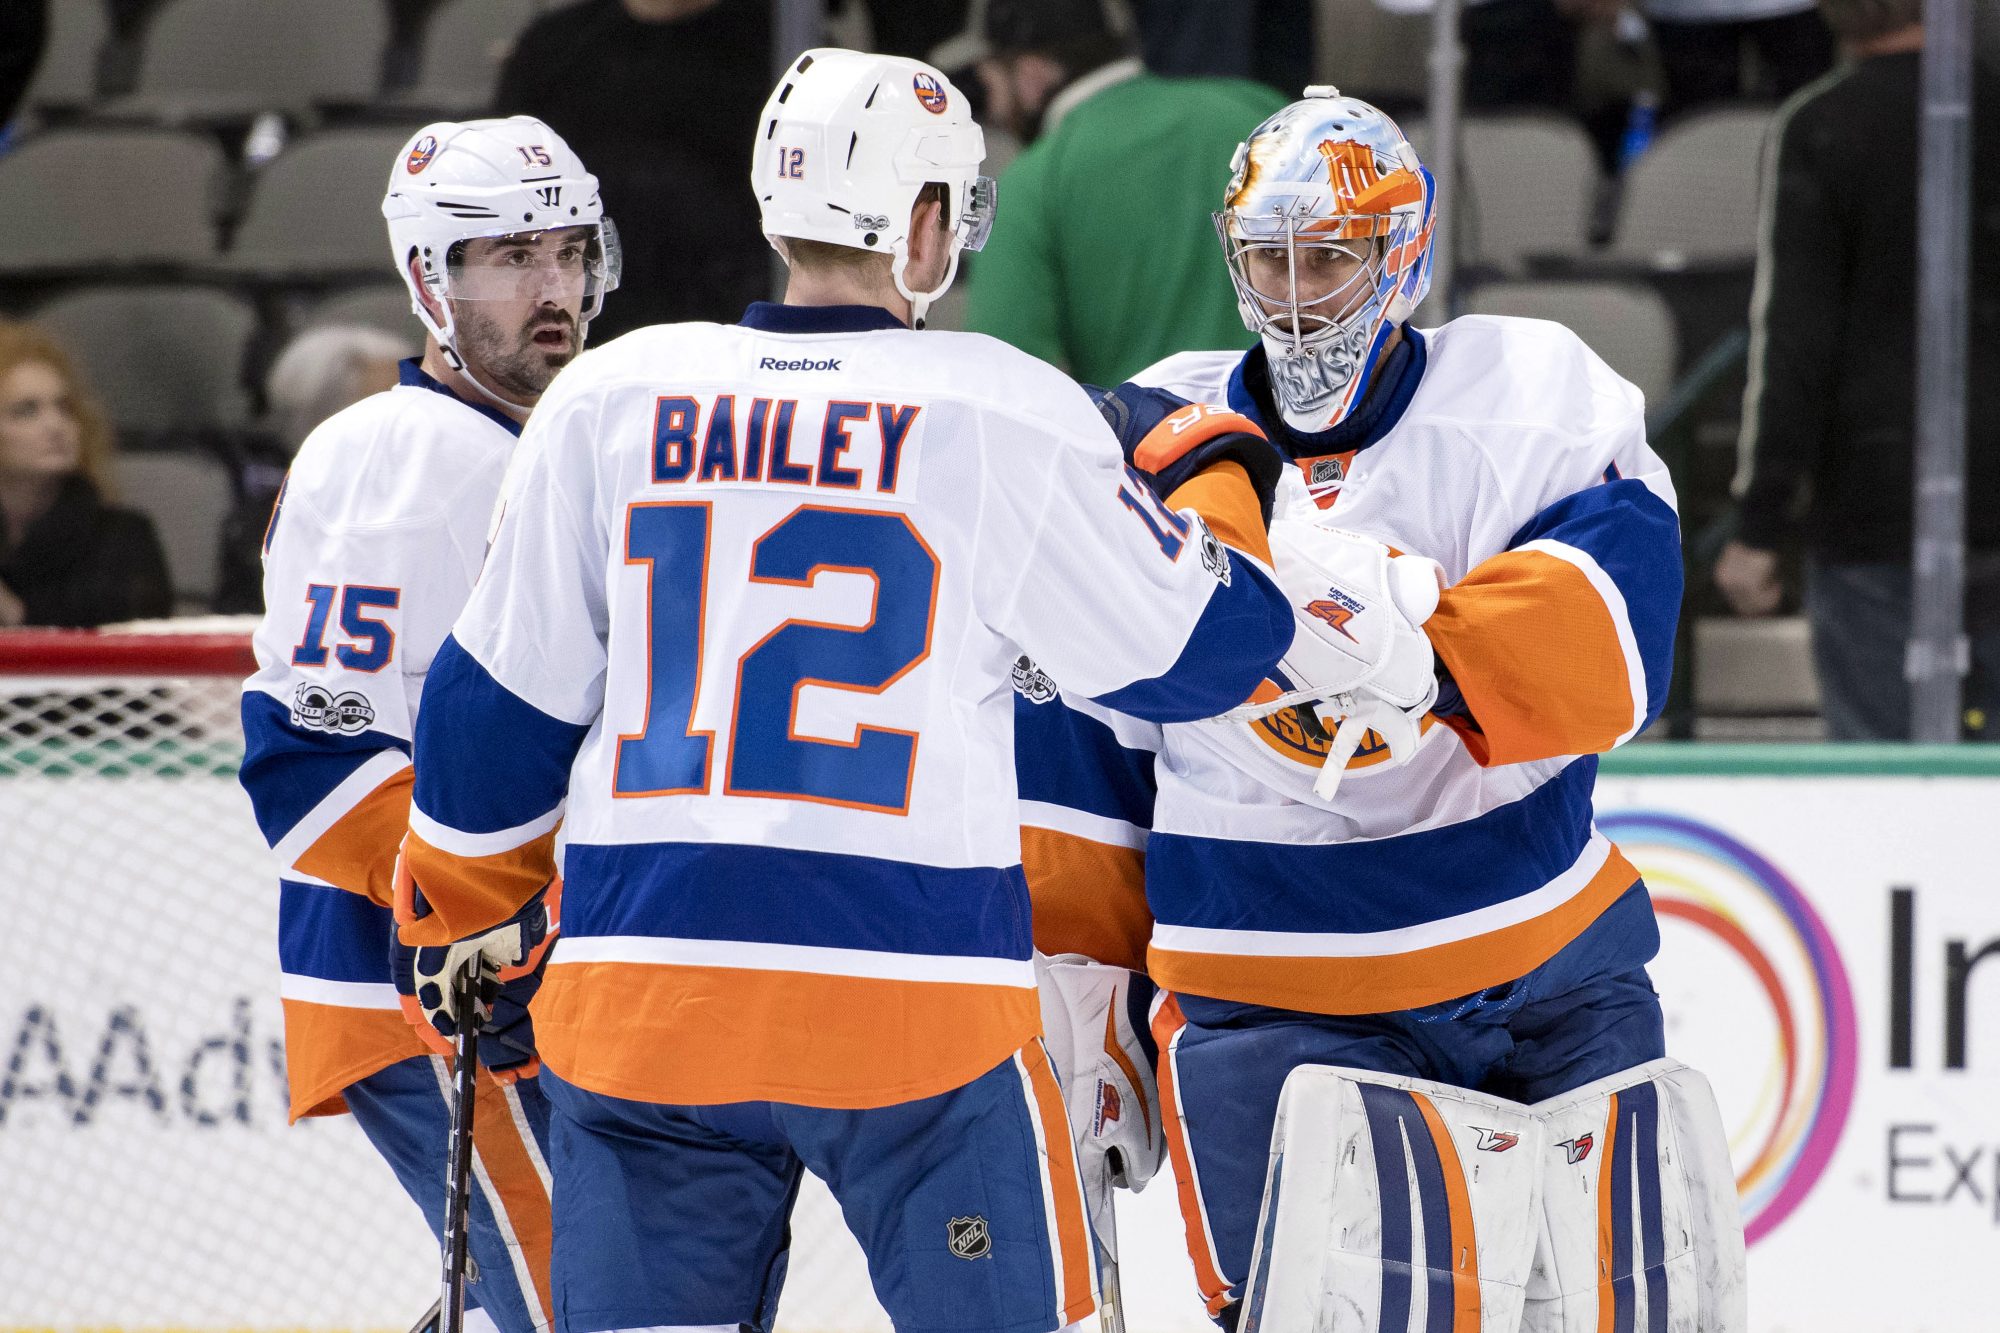 Islanders rally from down 3-1, win 5-4 over Stars in Dallas 